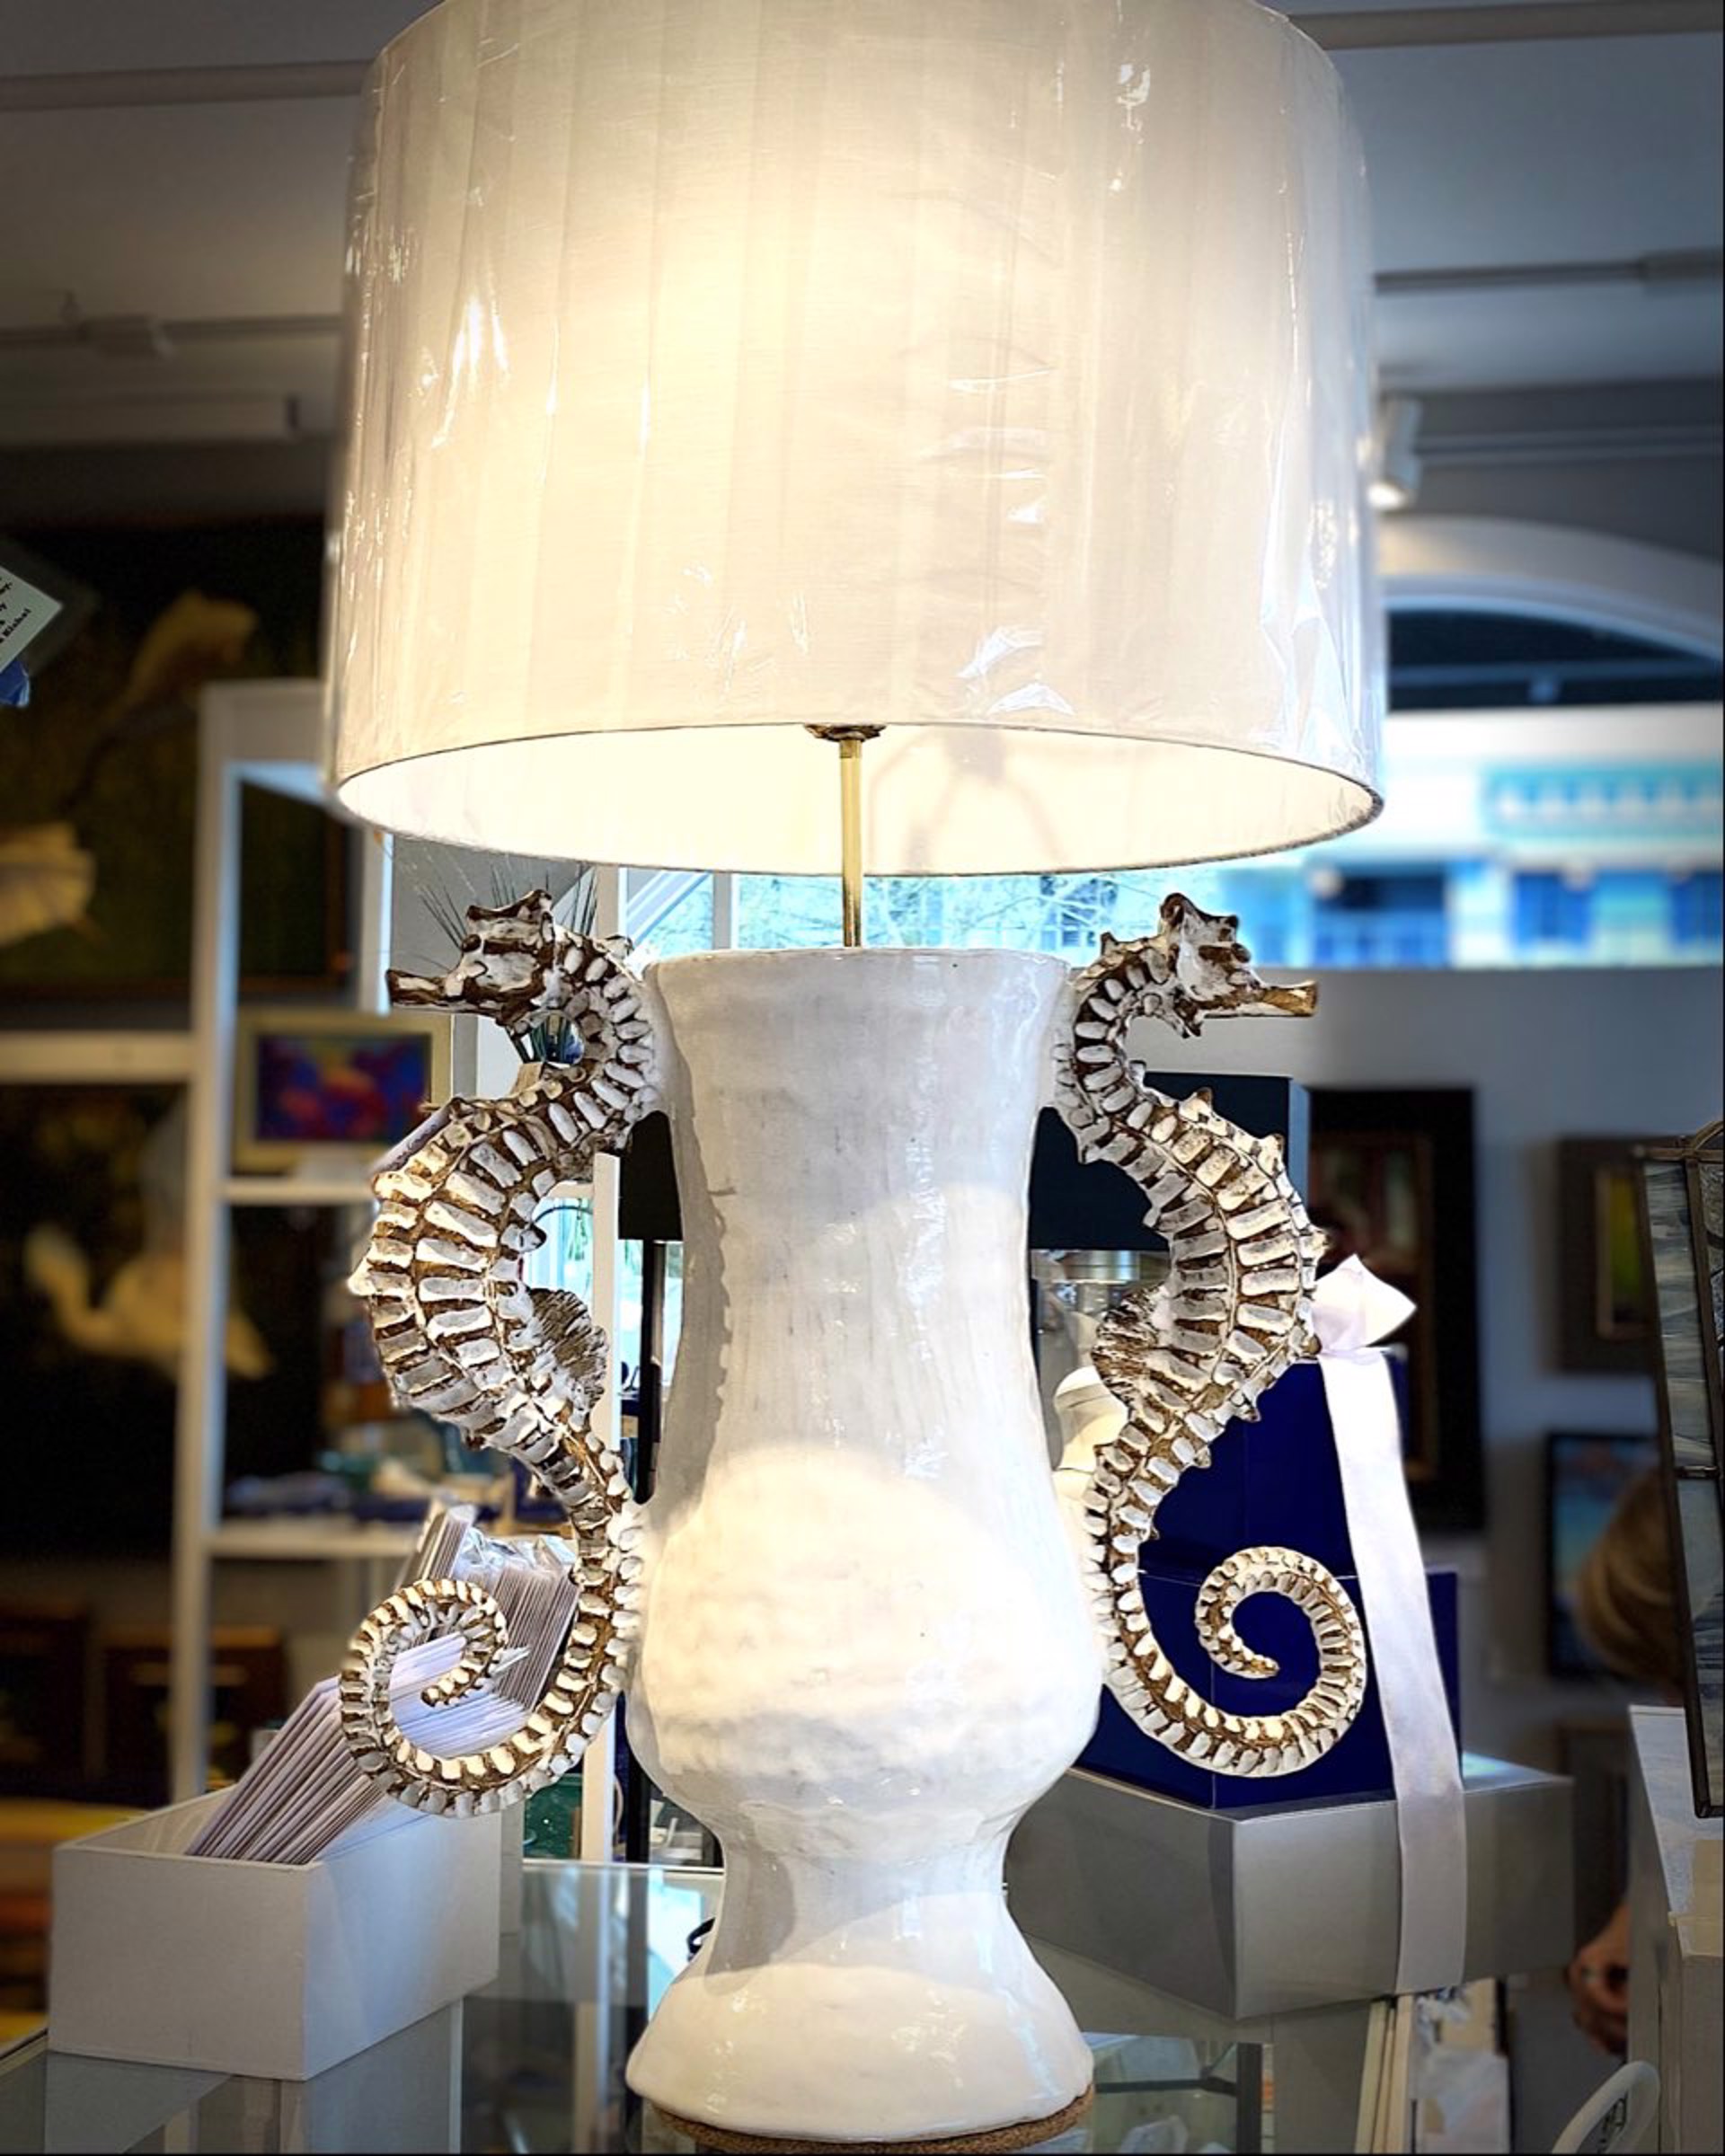 SG22-95 Double Seahorse Lamp (White) with shade 33”x17” by Shayne Greco